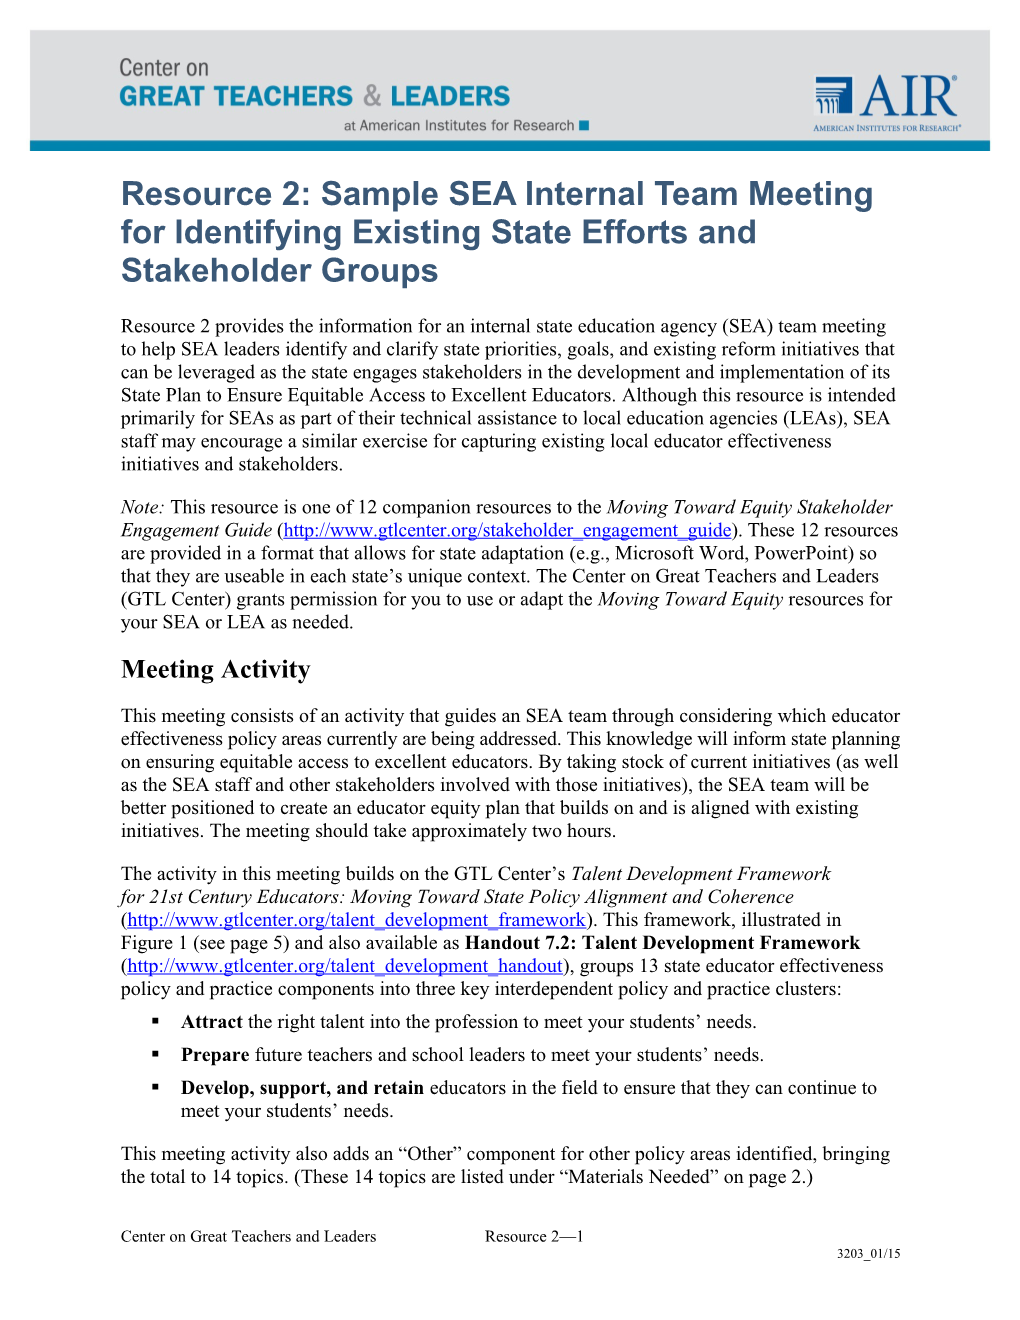 Resource 2: Sample SEA Internal Team Meeting for Identifying Existing State Efforts And